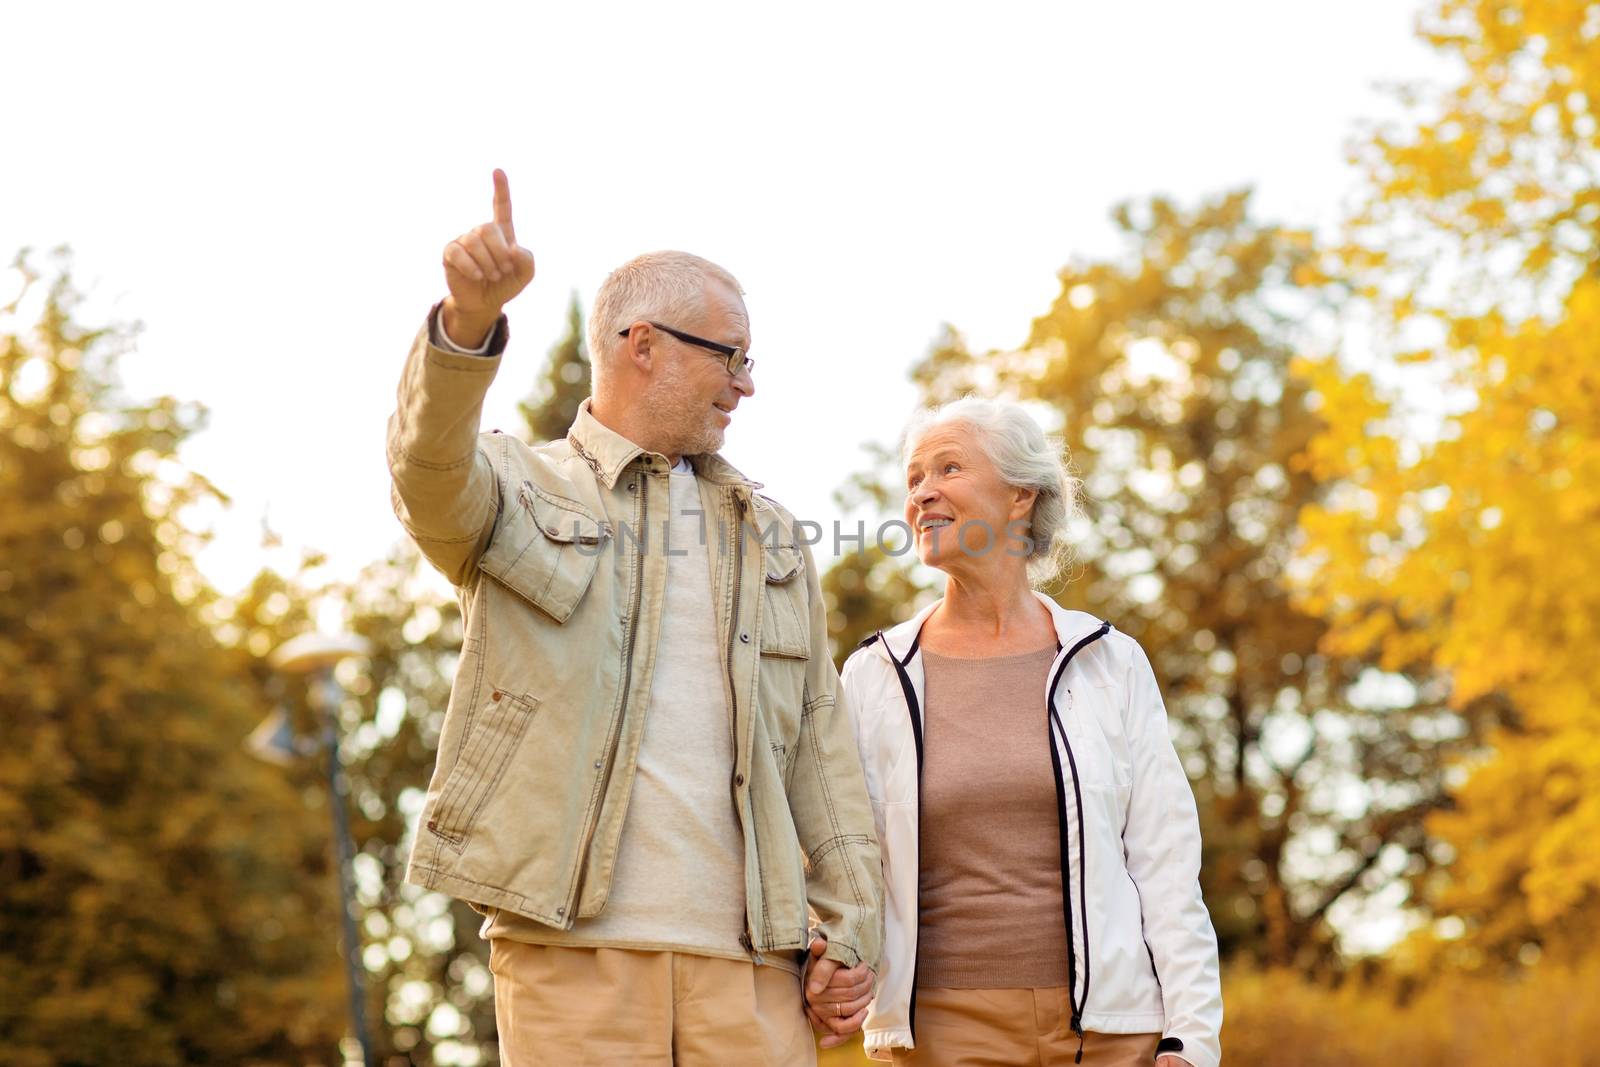 family, age, tourism, travel and people concept - senior couple pointing finger and walking in park